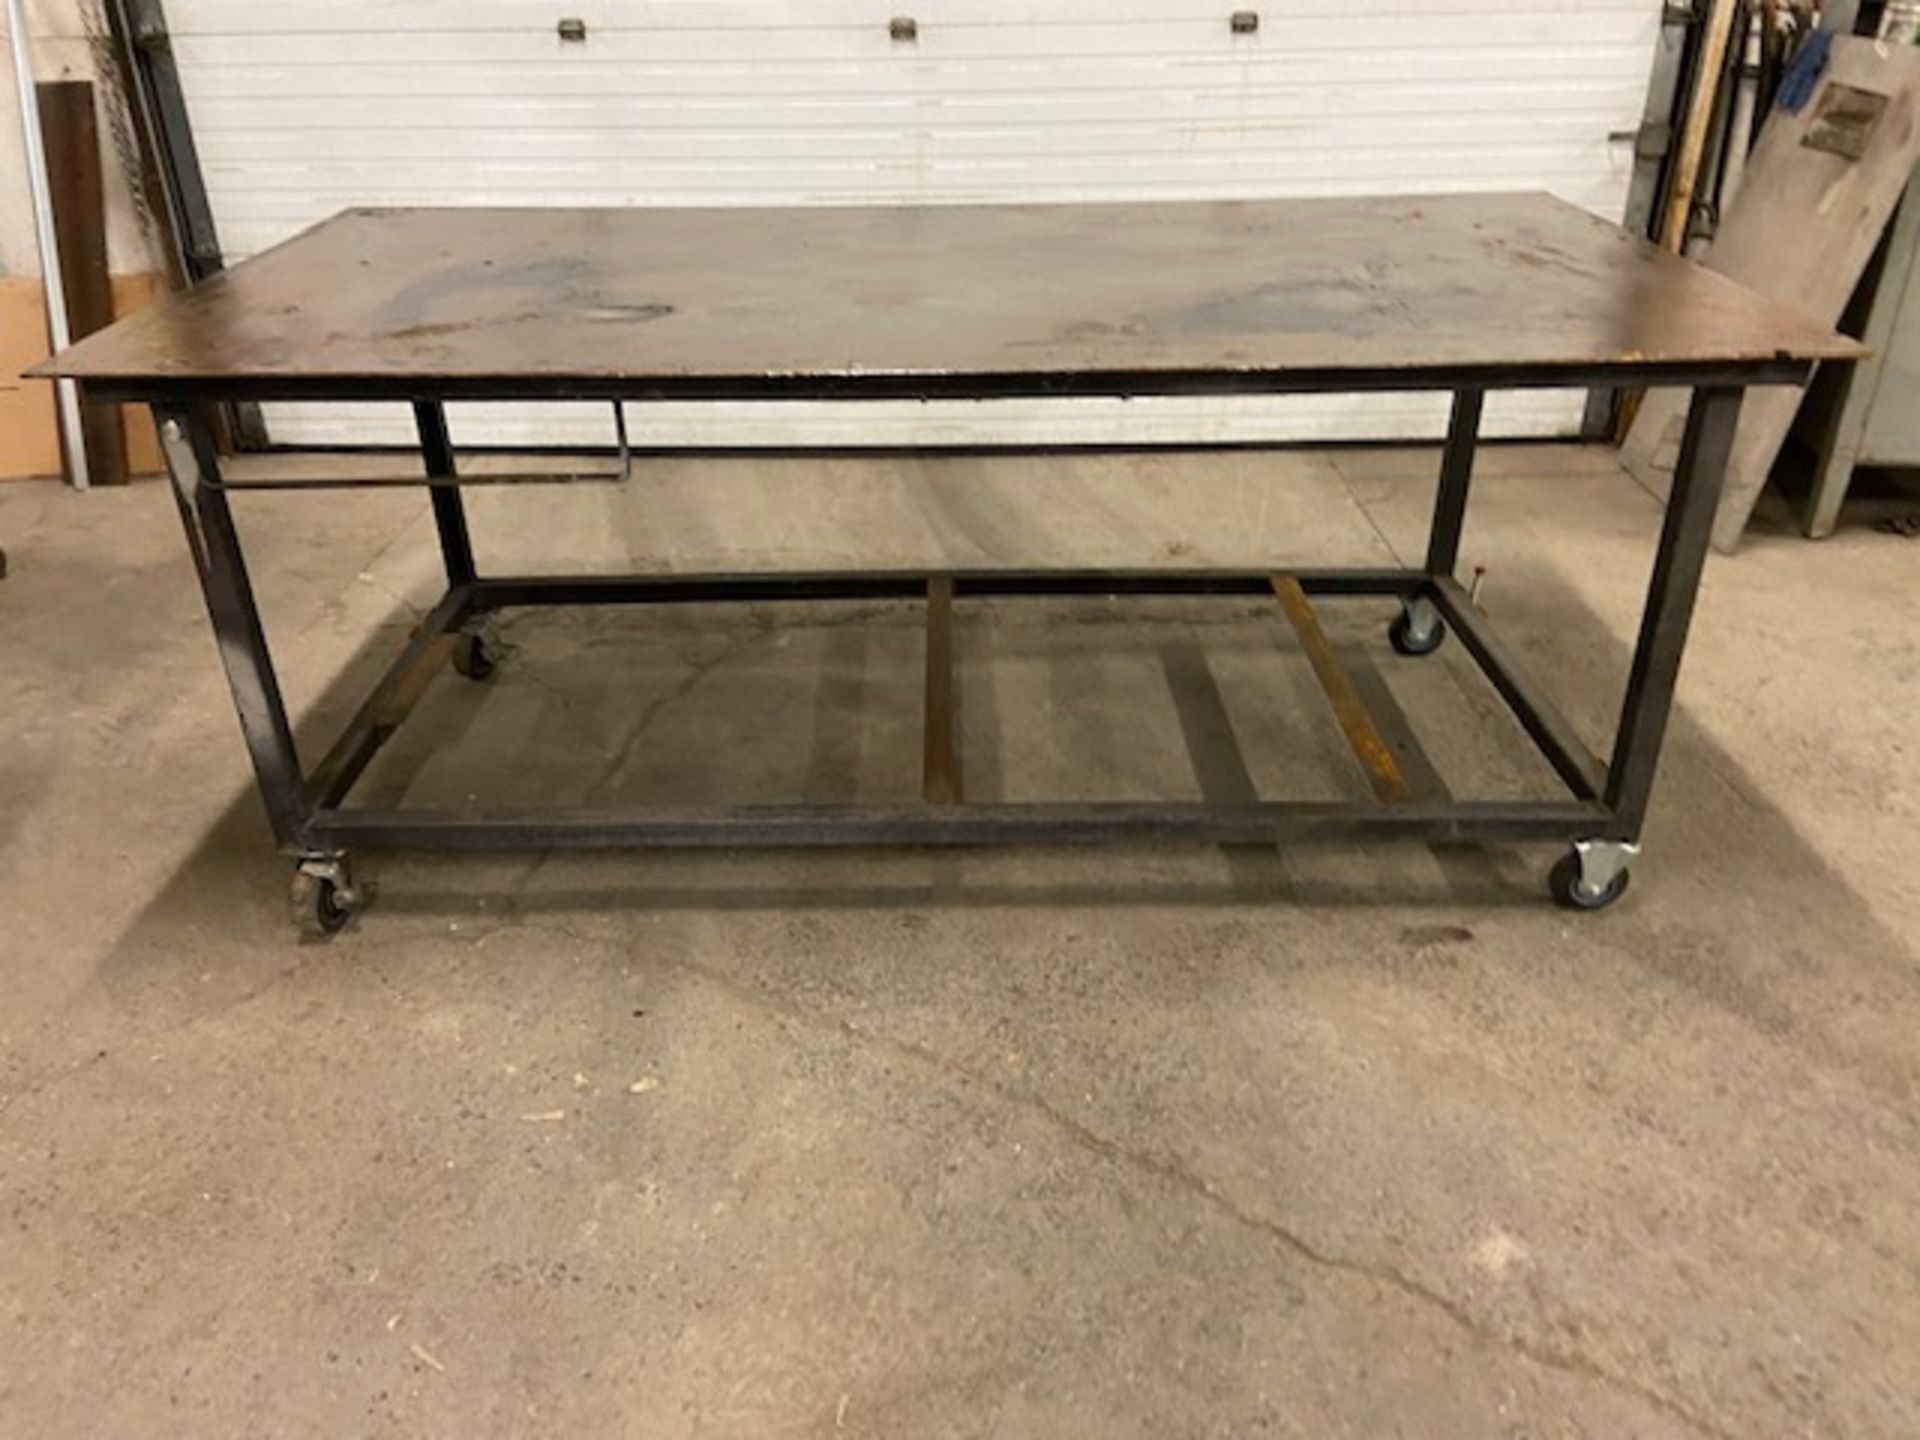 Work Table Work Bench Unit 8x4' 1/4" thick Steel on wheels / casters mobile